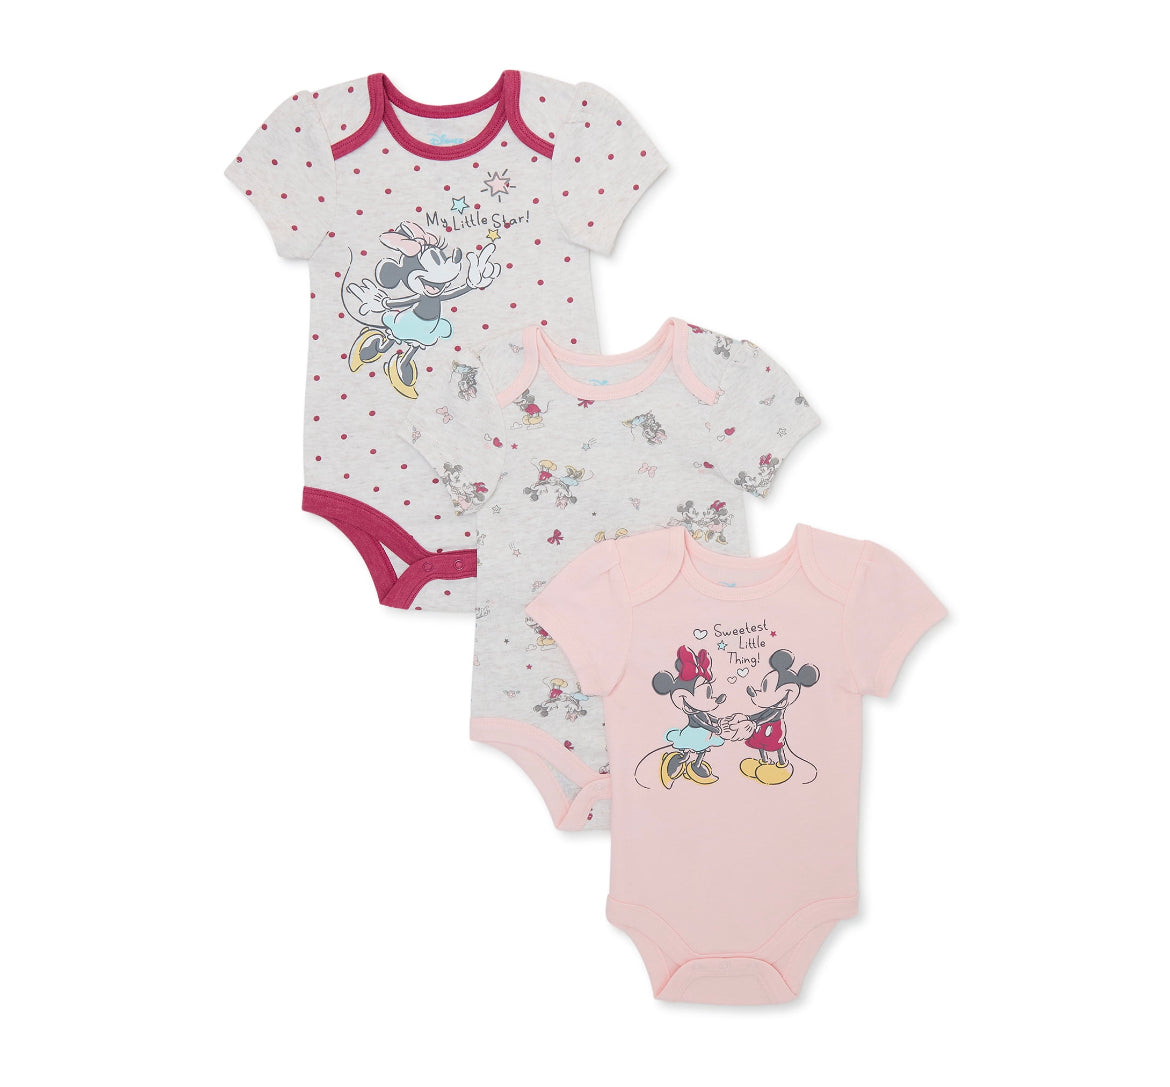 Disney Baby Wishes & Dreams Minnie Mouse Baby Boys and Girls Unisex Bodysuit, 3-Pack, Size 3-6 Months